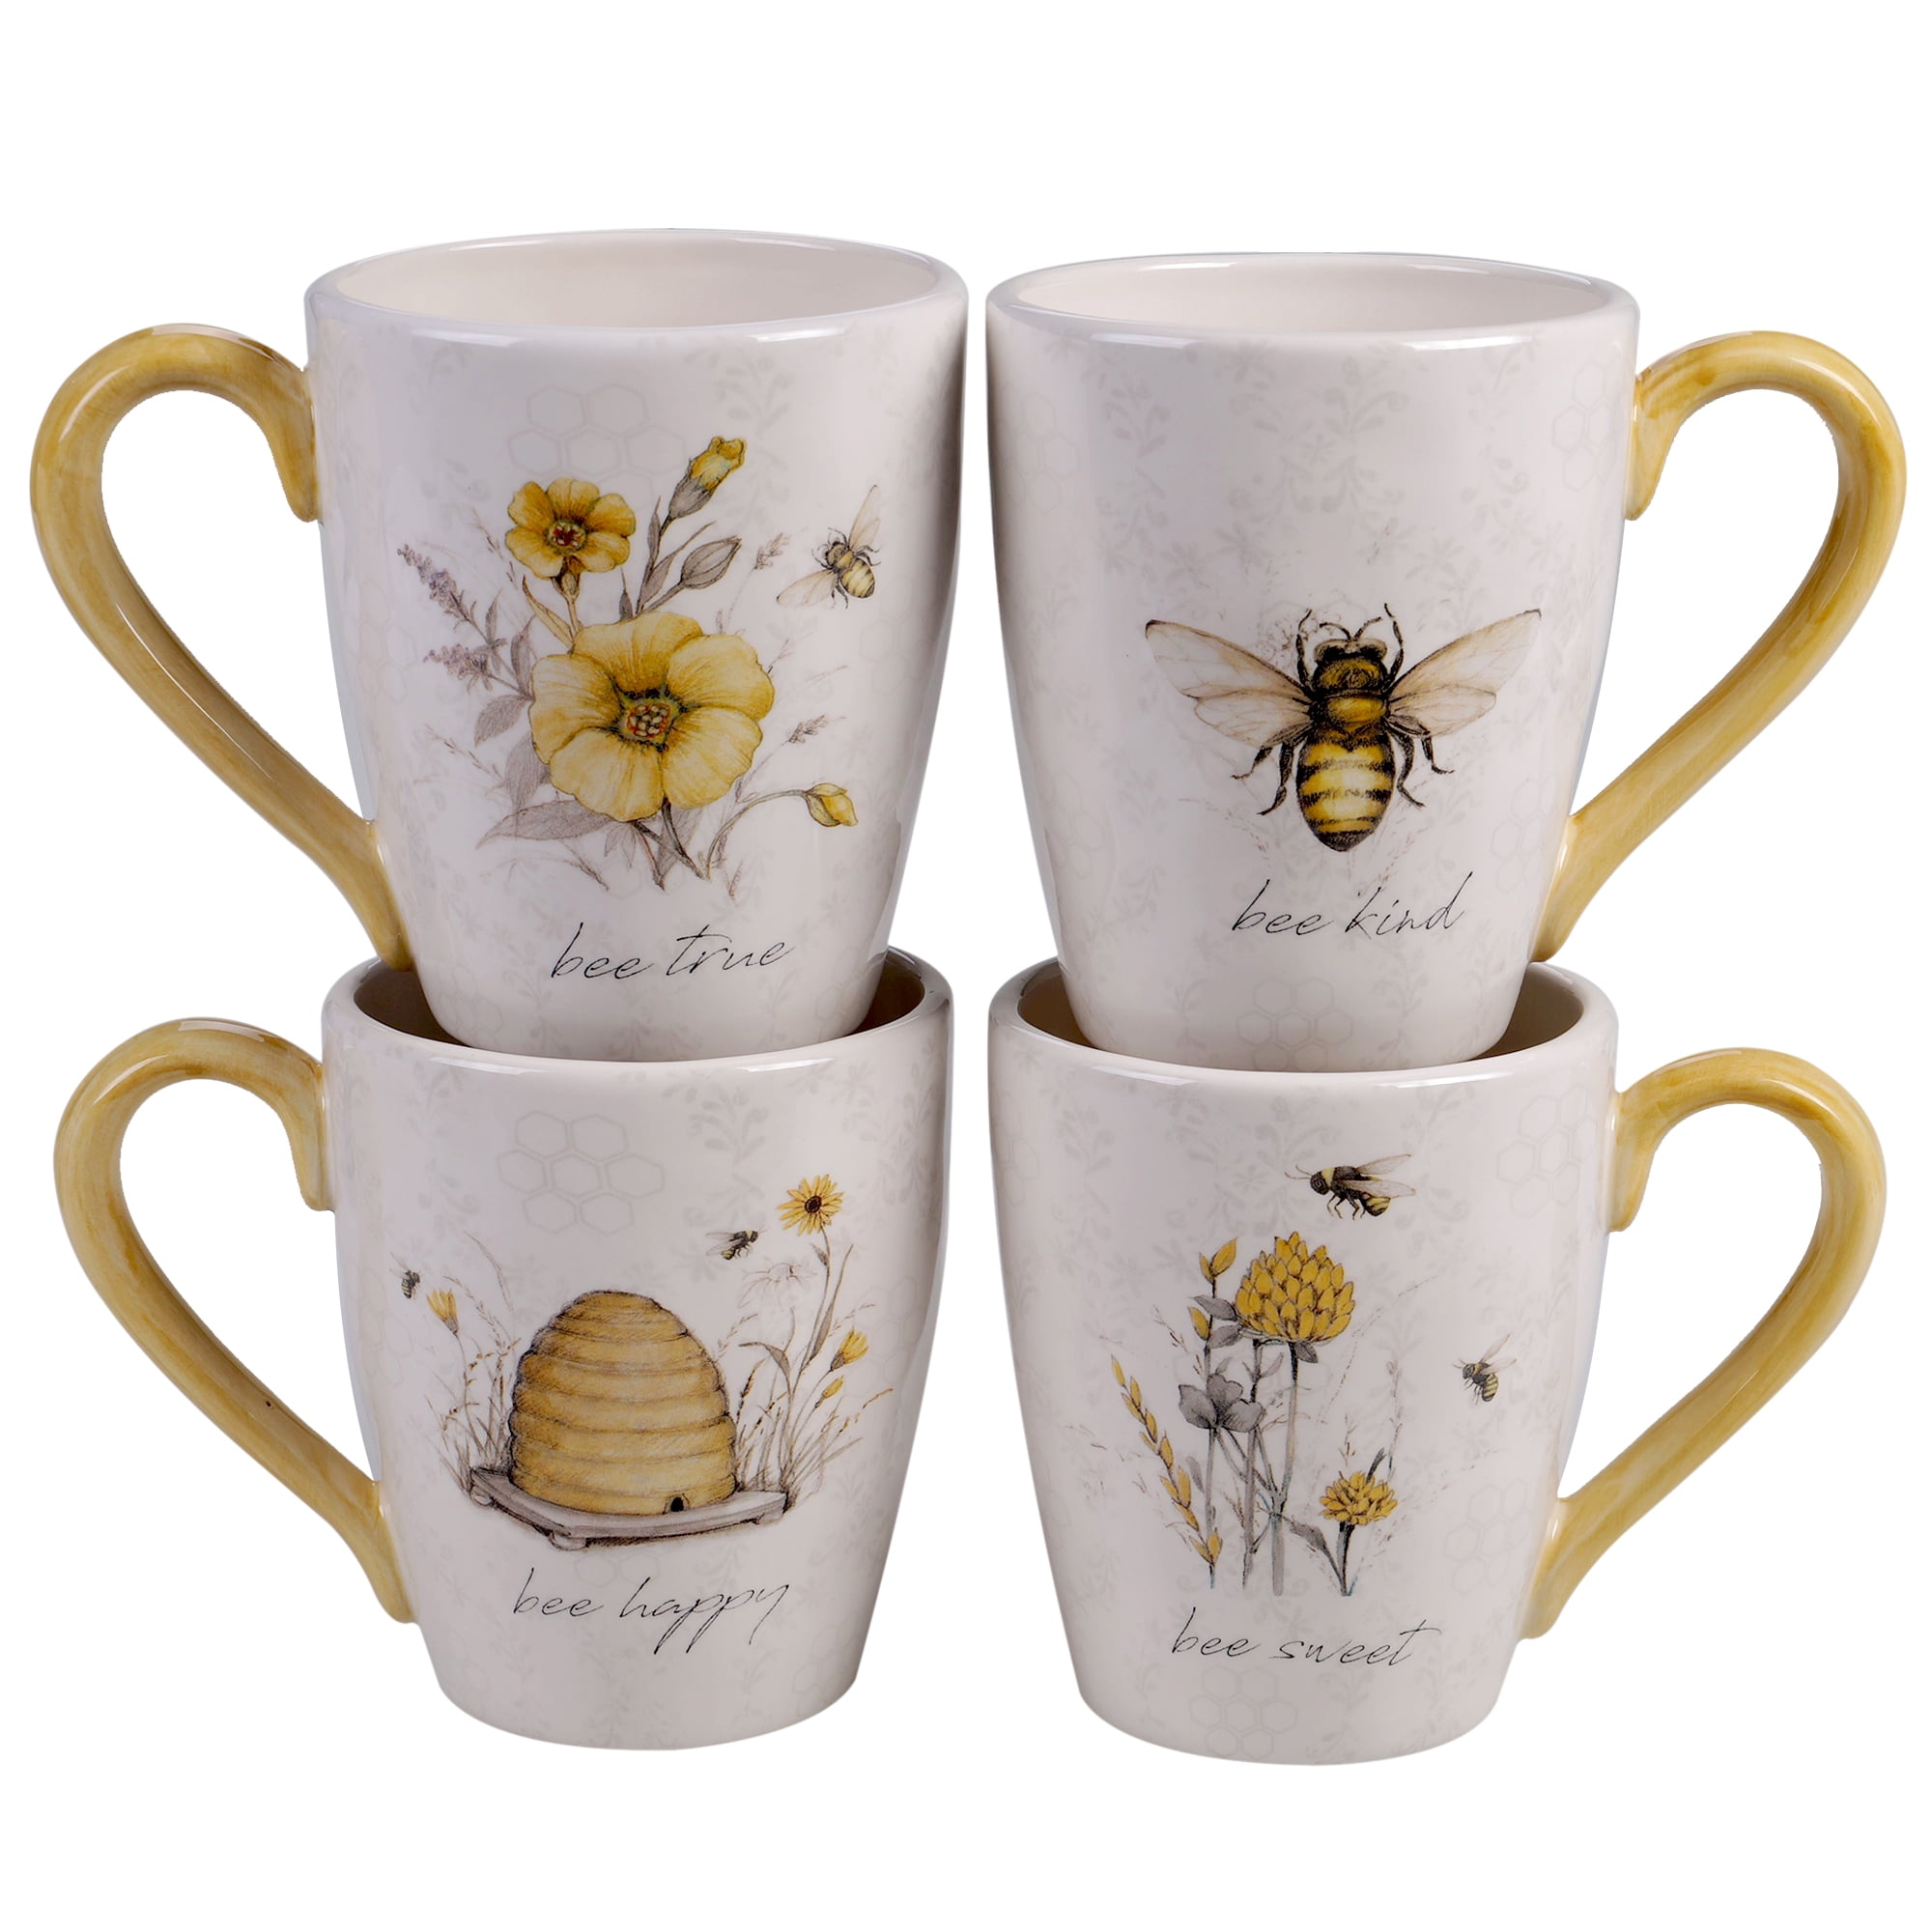 Ulster Weavers Presentation Boxed Lady Bee Keeper Hives Sunflowers Mug Cup Pot 